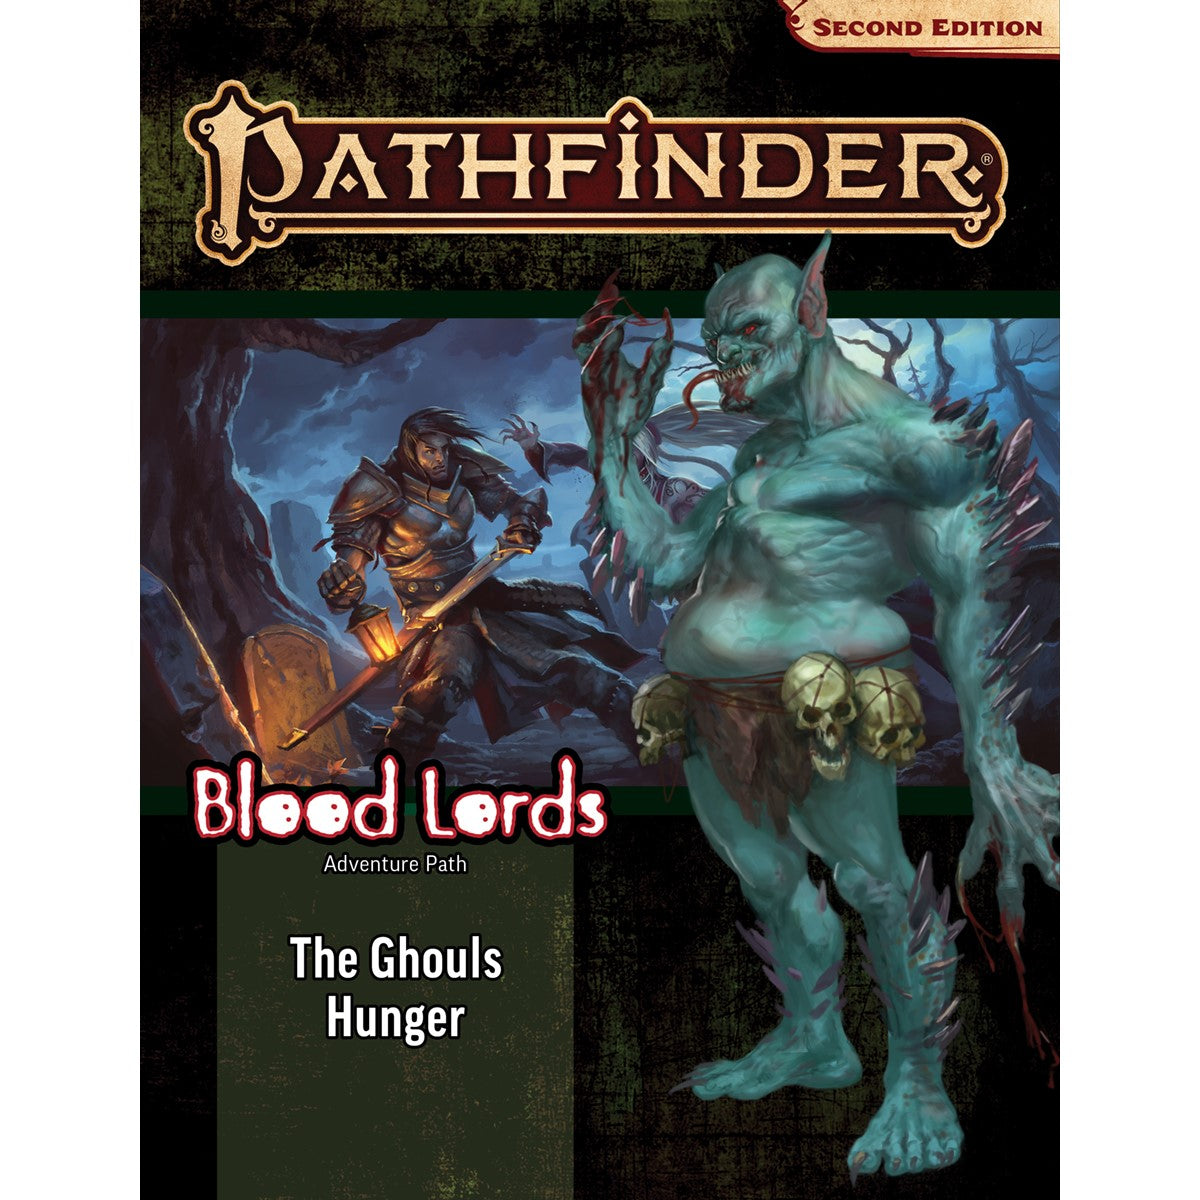 Pathfinder Second Edition Adventure Path Blood Lords #4 The Ghouls Hunger